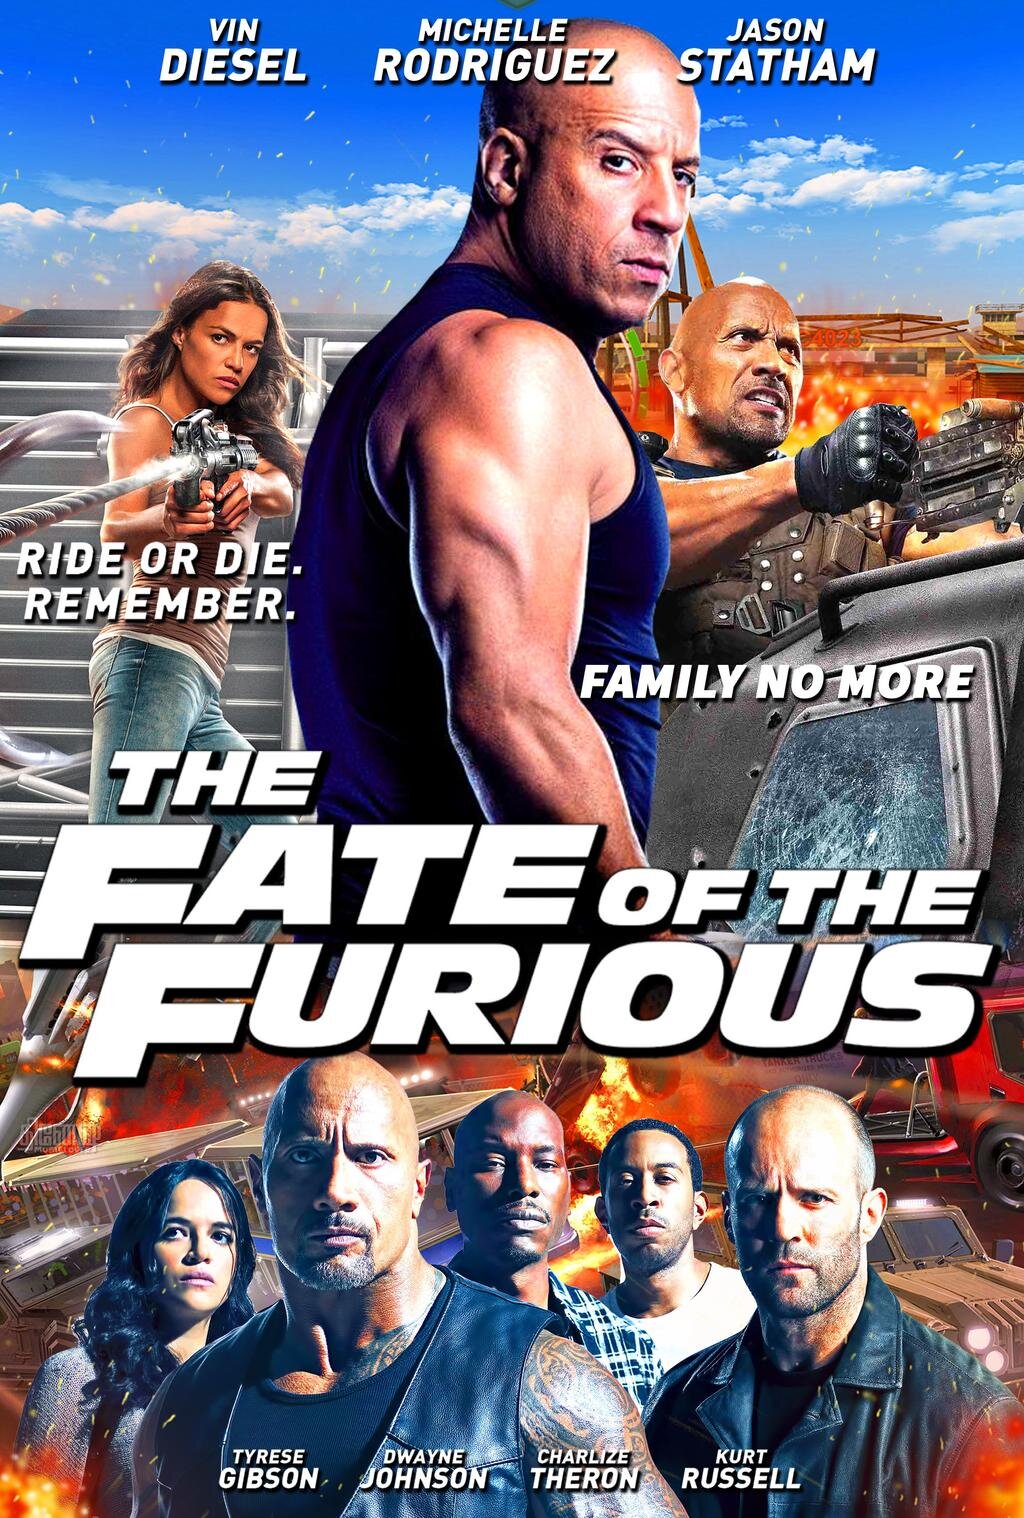 The Fate of the Furious 2017 7a.jpg